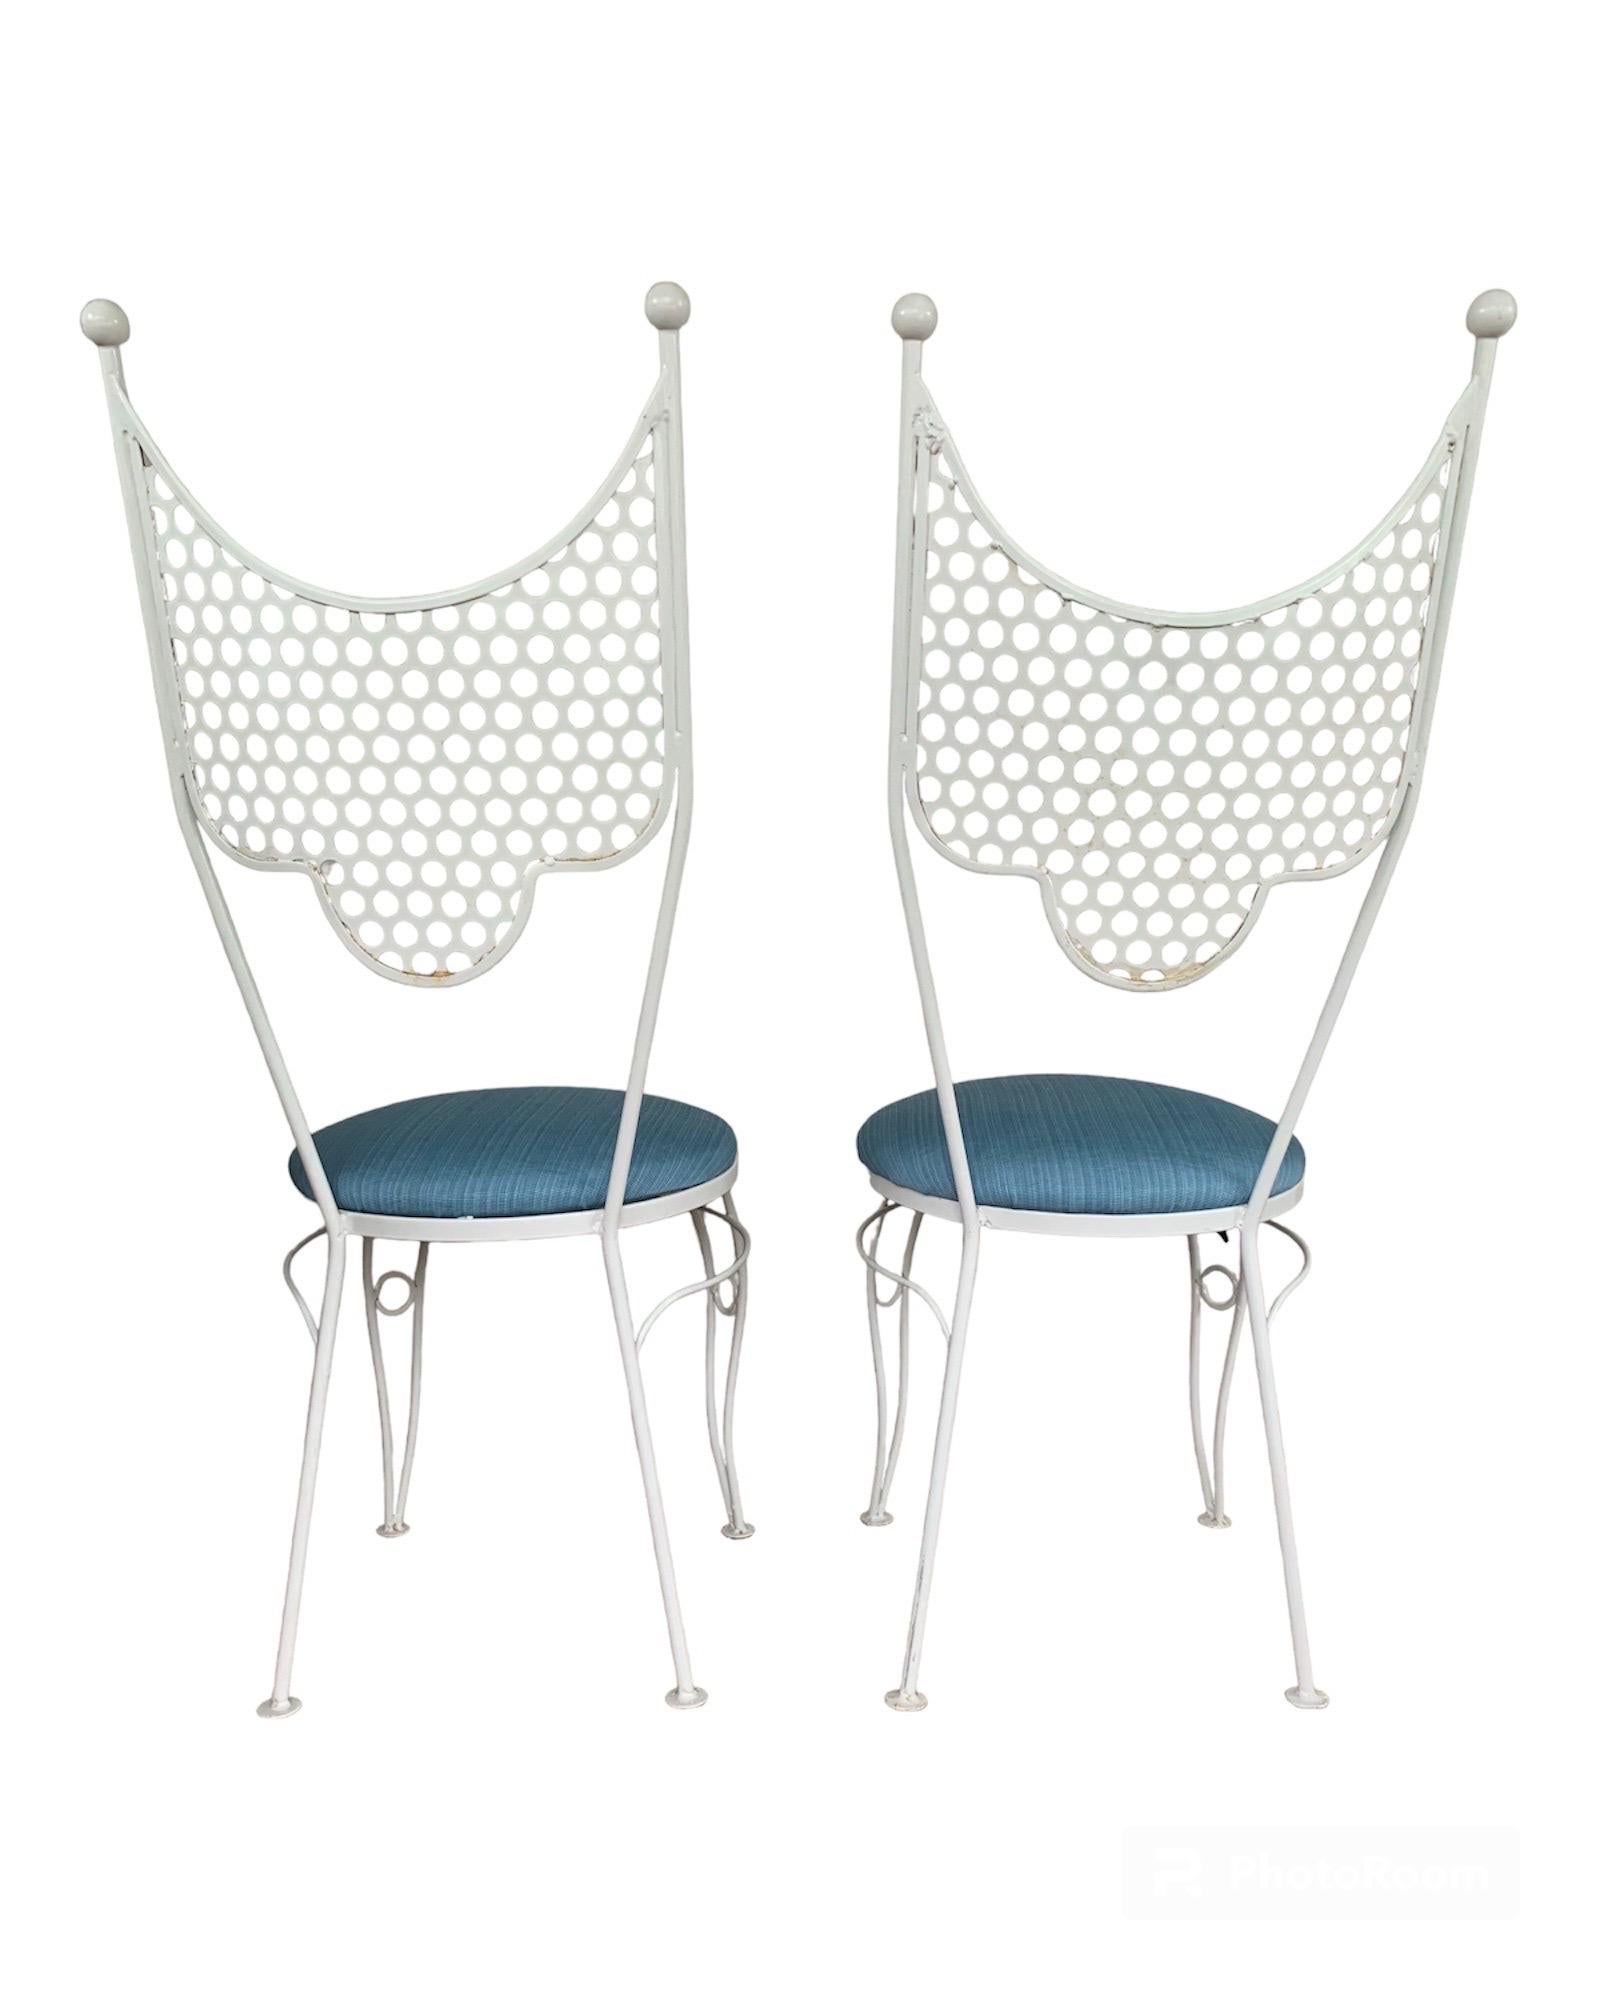 This is a pair of white enameled-iron chairs from Salterini’s “Circus” Collection, ca. mid-1950s. They are in very good condition, having been recently refinished. They have been freshly reupholstered in a thick blue striated fabric and are ready